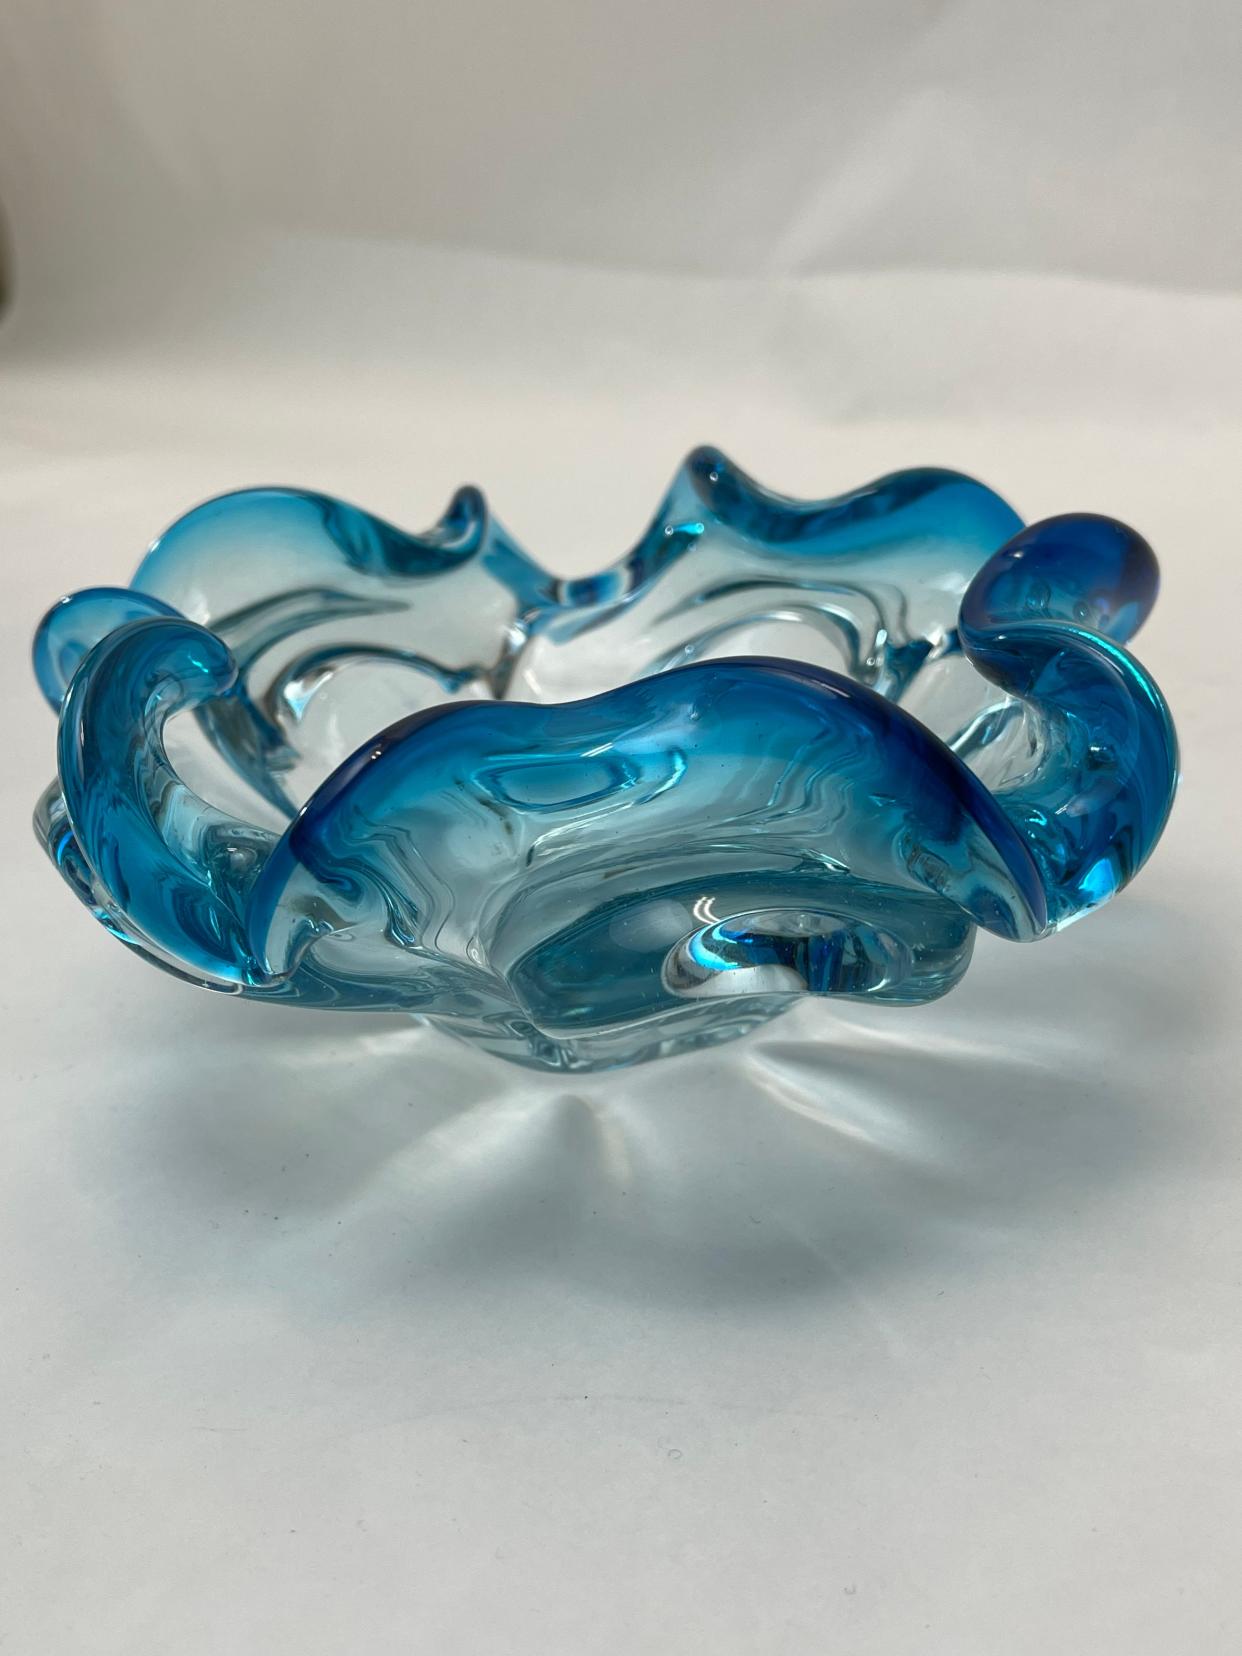 Multiple hues, flowing designs and internal bubbles are characteristic of Murano glass ($34).